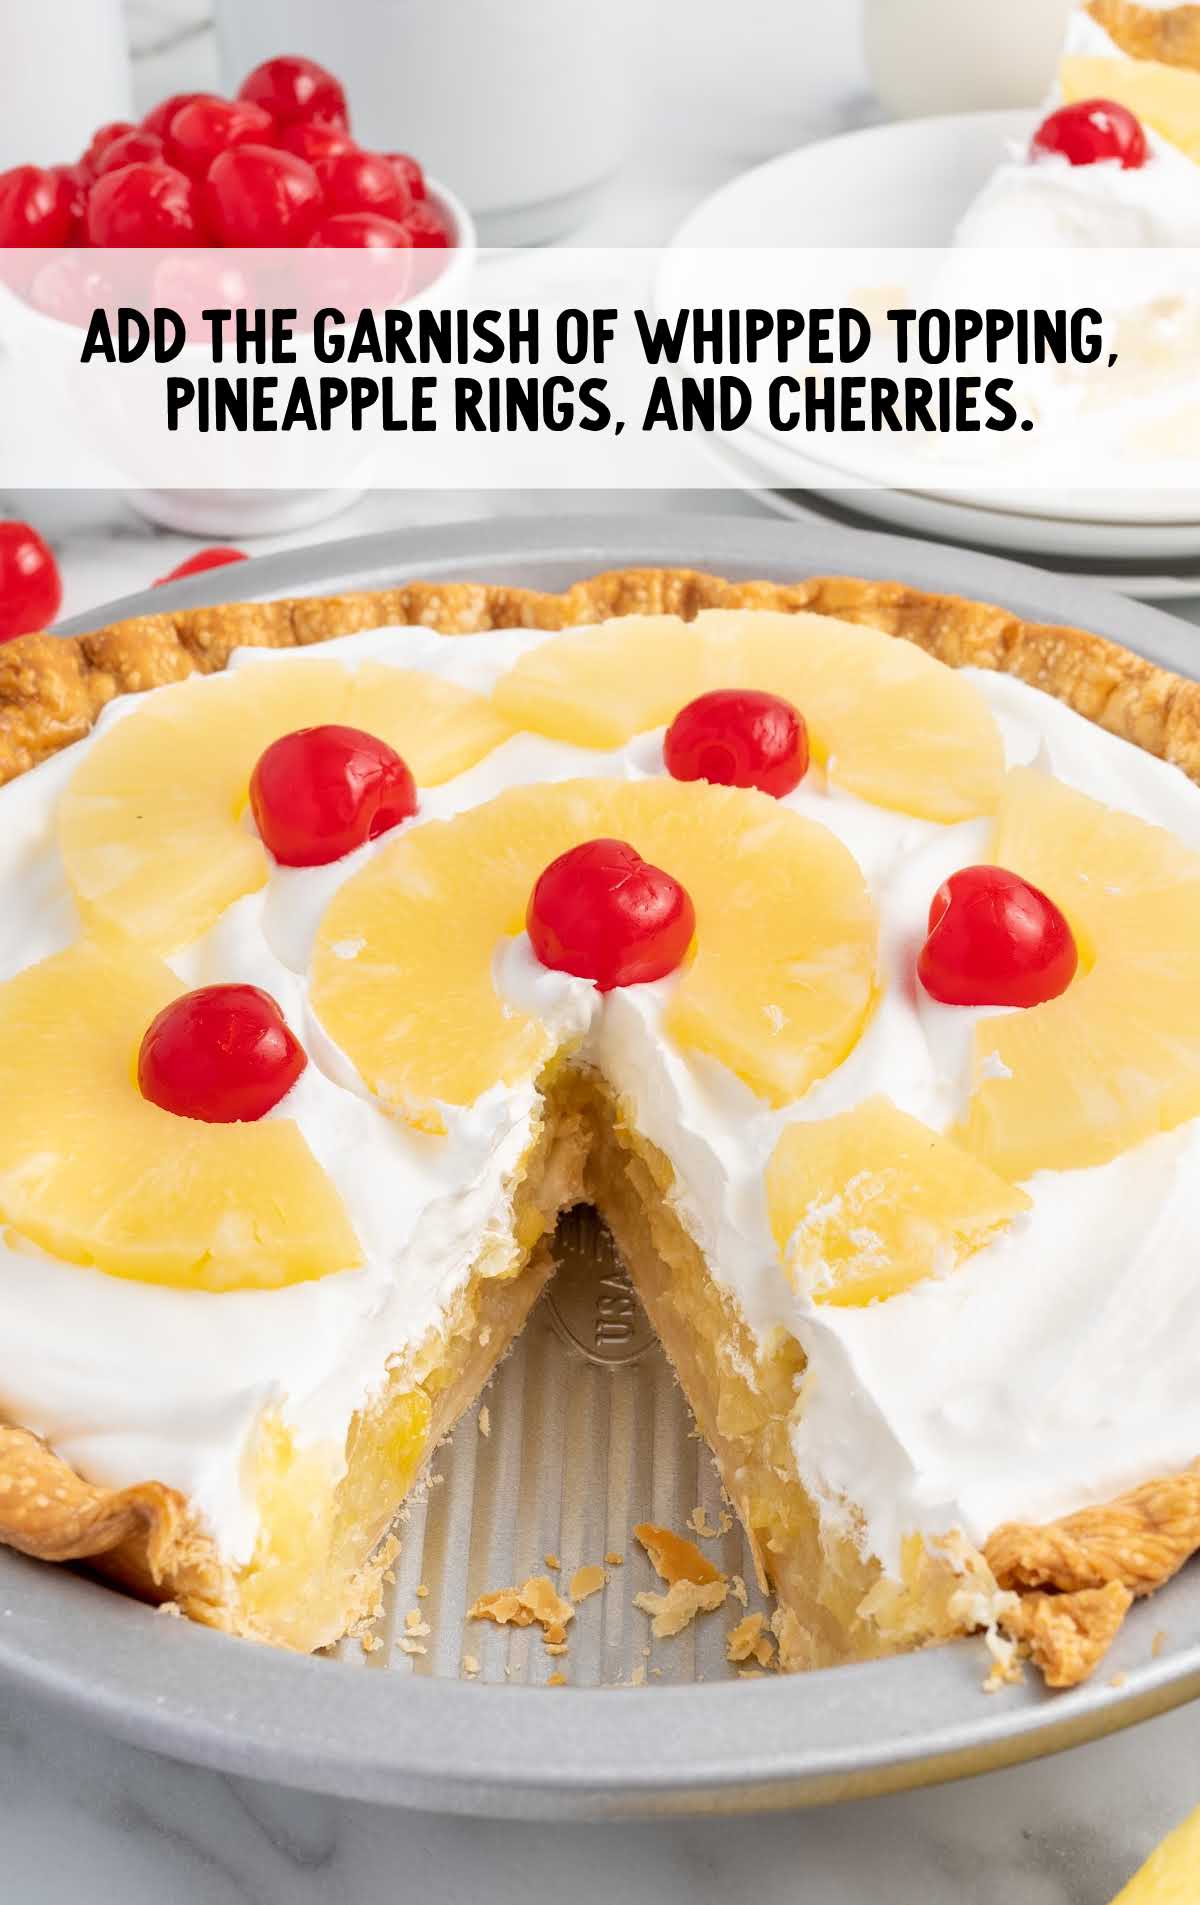 whipped topping, pineapple rings, and cherries garnished